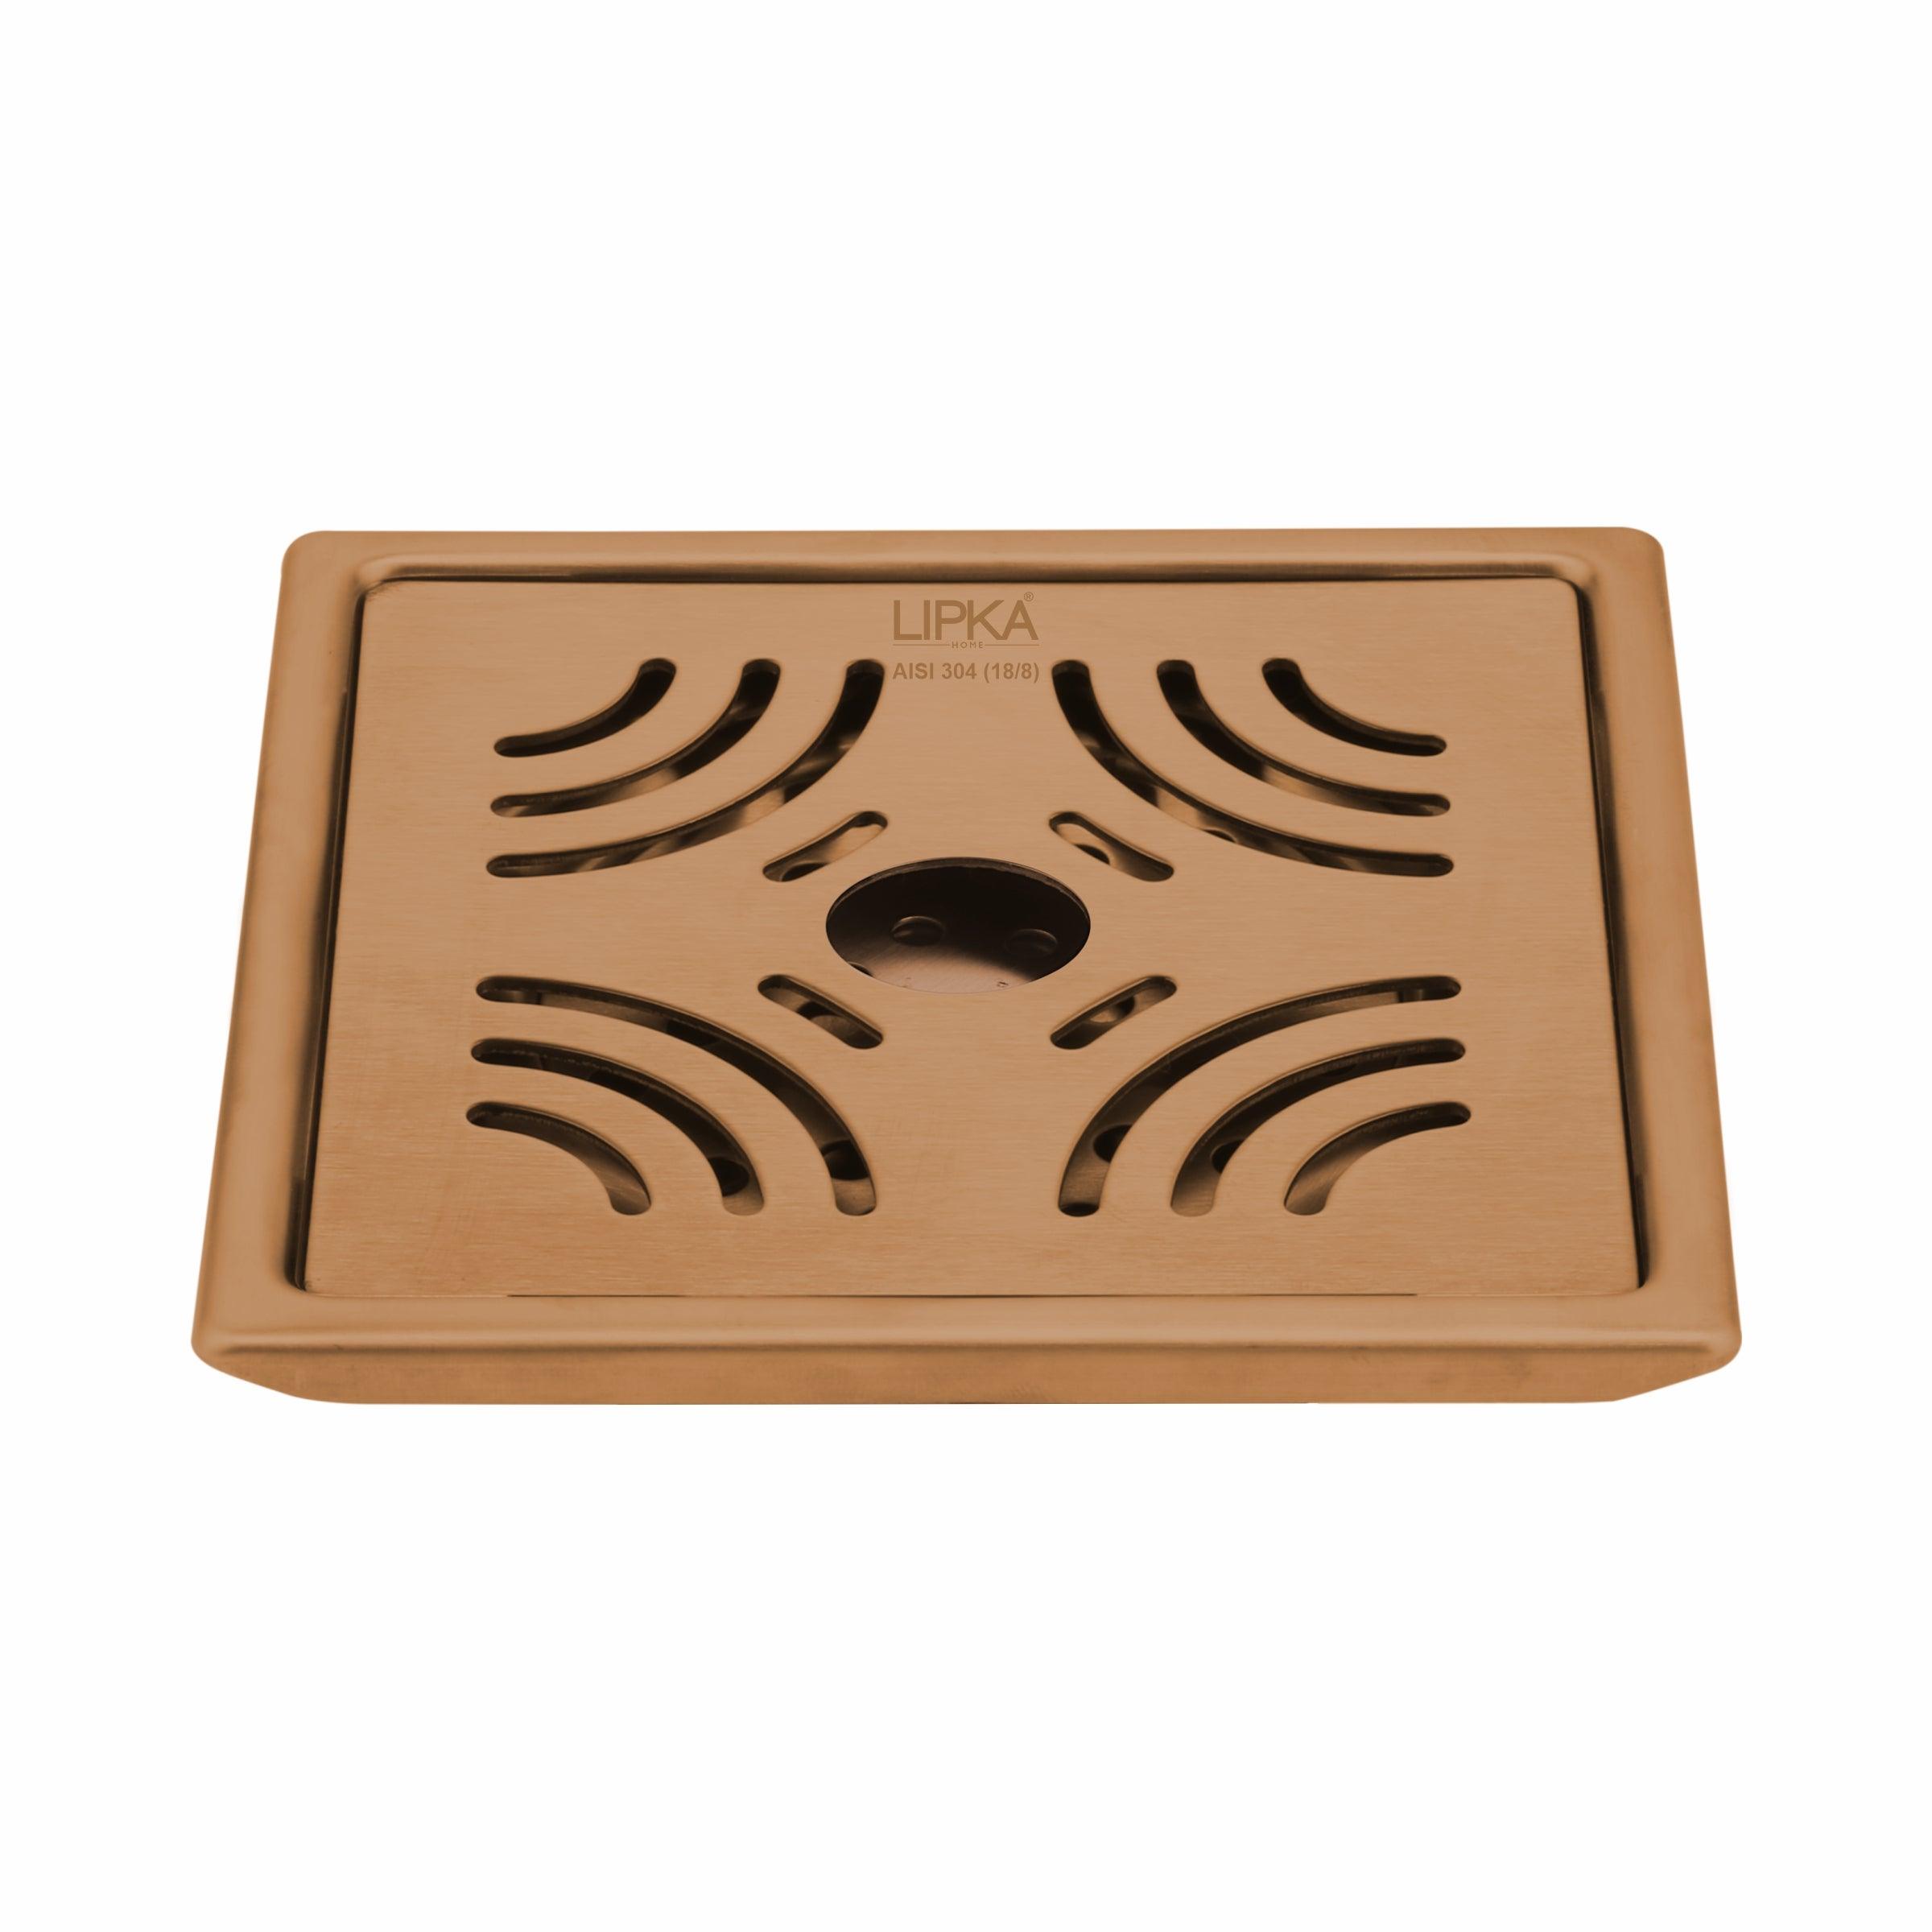 Purple Exclusive Square Floor Drain in Antique Copper PVD Coating (6 x 6 Inches) with Hole - LIPKA